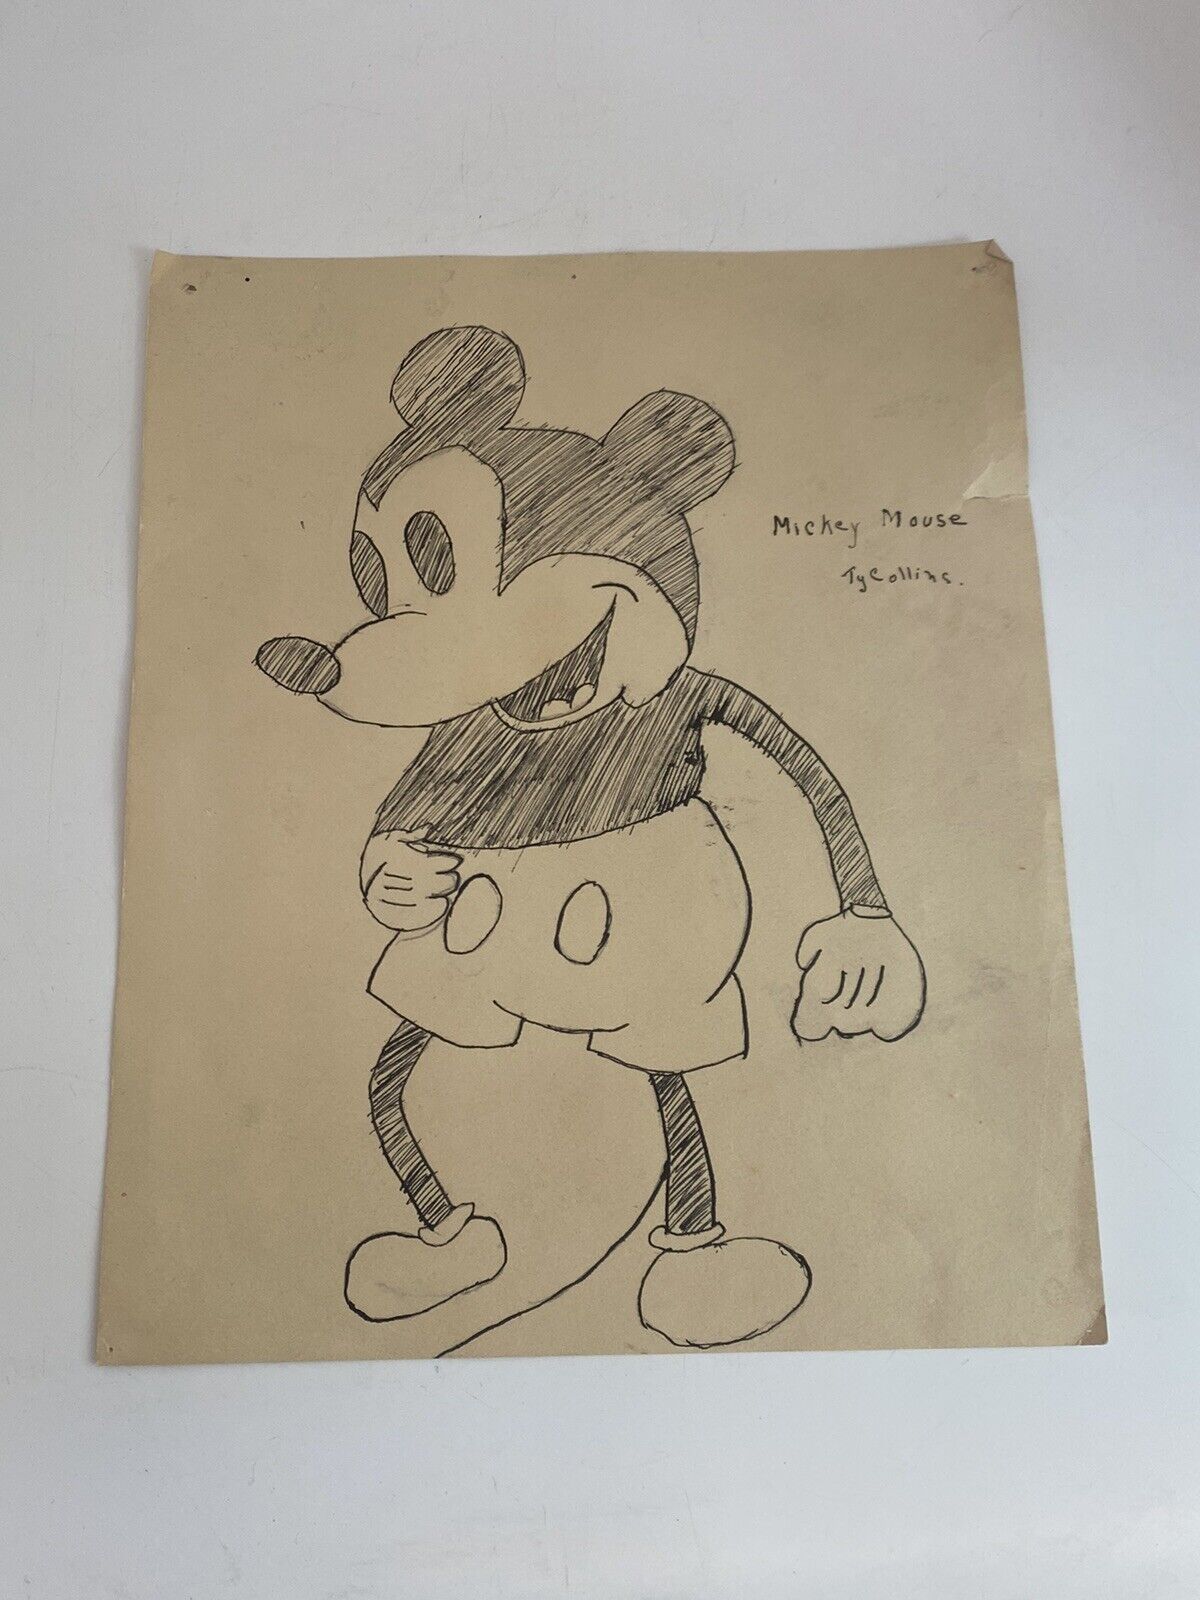 Antique 1930s Drawn Sketch Mickey Mouse Signed Disney American Folk Art